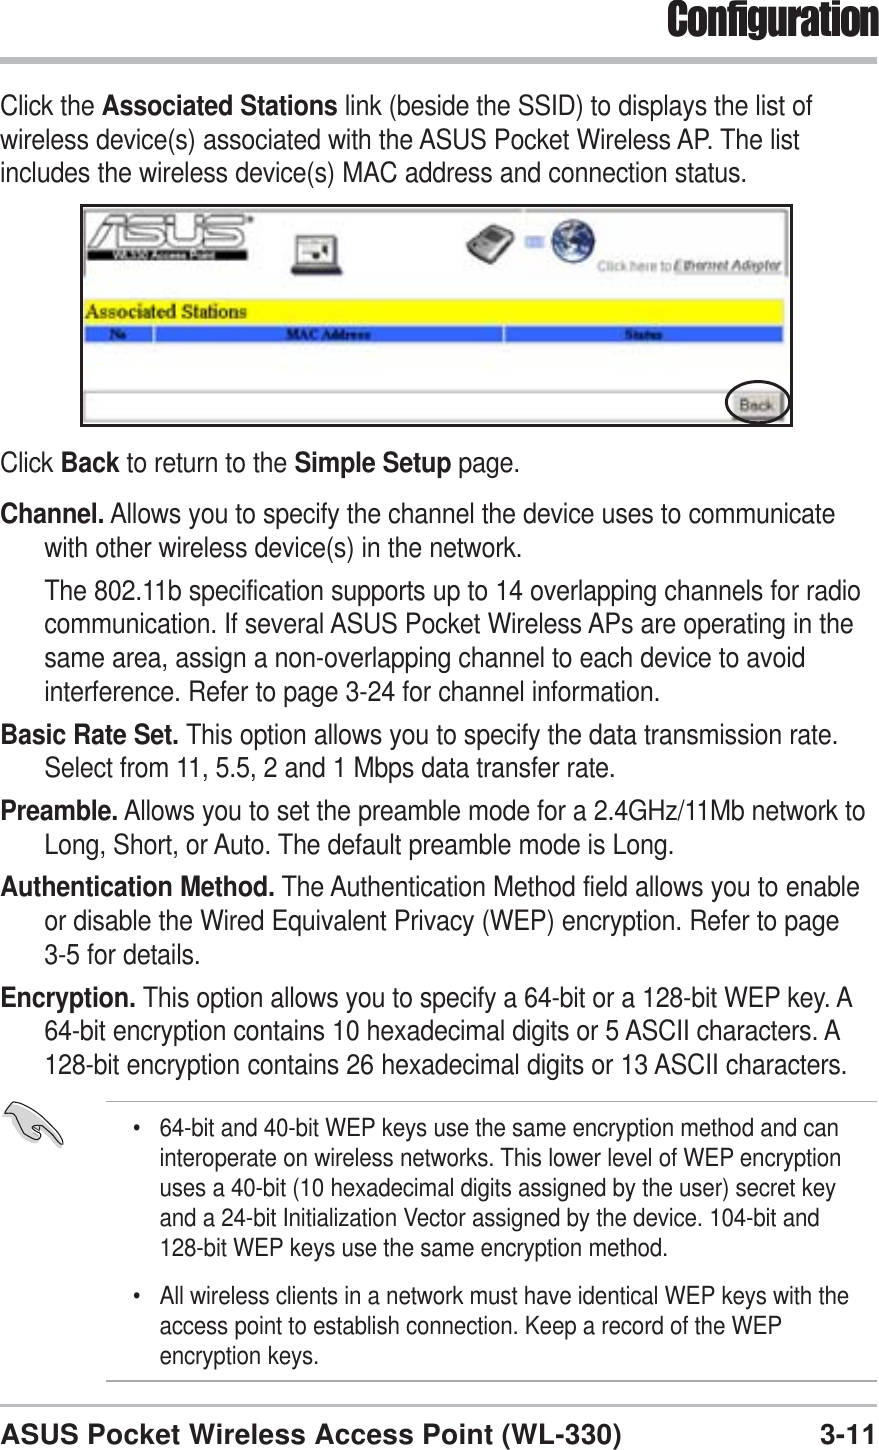 3-11ASUS Pocket Wireless Access Point (WL-330)ConfigurationClick the Associated Stations link (beside the SSID) to displays the list ofwireless device(s) associated with the ASUS Pocket Wireless AP. The listincludes the wireless device(s) MAC address and connection status.Click Back to return to the Simple Setup page.Channel. Allows you to specify the channel the device uses to communicatewith other wireless device(s) in the network.The 802.11b specification supports up to 14 overlapping channels for radiocommunication. If several ASUS Pocket Wireless APs are operating in thesame area, assign a non-overlapping channel to each device to avoidinterference. Refer to page 3-24 for channel information.Basic Rate Set. This option allows you to specify the data transmission rate.Select from 11, 5.5, 2 and 1 Mbps data transfer rate.Preamble. Allows you to set the preamble mode for a 2.4GHz/11Mb network toLong, Short, or Auto. The default preamble mode is Long.Authentication Method. The Authentication Method field allows you to enableor disable the Wired Equivalent Privacy (WEP) encryption. Refer to page3-5 for details.Encryption. This option allows you to specify a 64-bit or a 128-bit WEP key. A64-bit encryption contains 10 hexadecimal digits or 5 ASCII characters. A128-bit encryption contains 26 hexadecimal digits or 13 ASCII characters.• 64-bit and 40-bit WEP keys use the same encryption method and caninteroperate on wireless networks. This lower level of WEP encryptionuses a 40-bit (10 hexadecimal digits assigned by the user) secret keyand a 24-bit Initialization Vector assigned by the device. 104-bit and128-bit WEP keys use the same encryption method.• All wireless clients in a network must have identical WEP keys with theaccess point to establish connection. Keep a record of the WEPencryption keys.